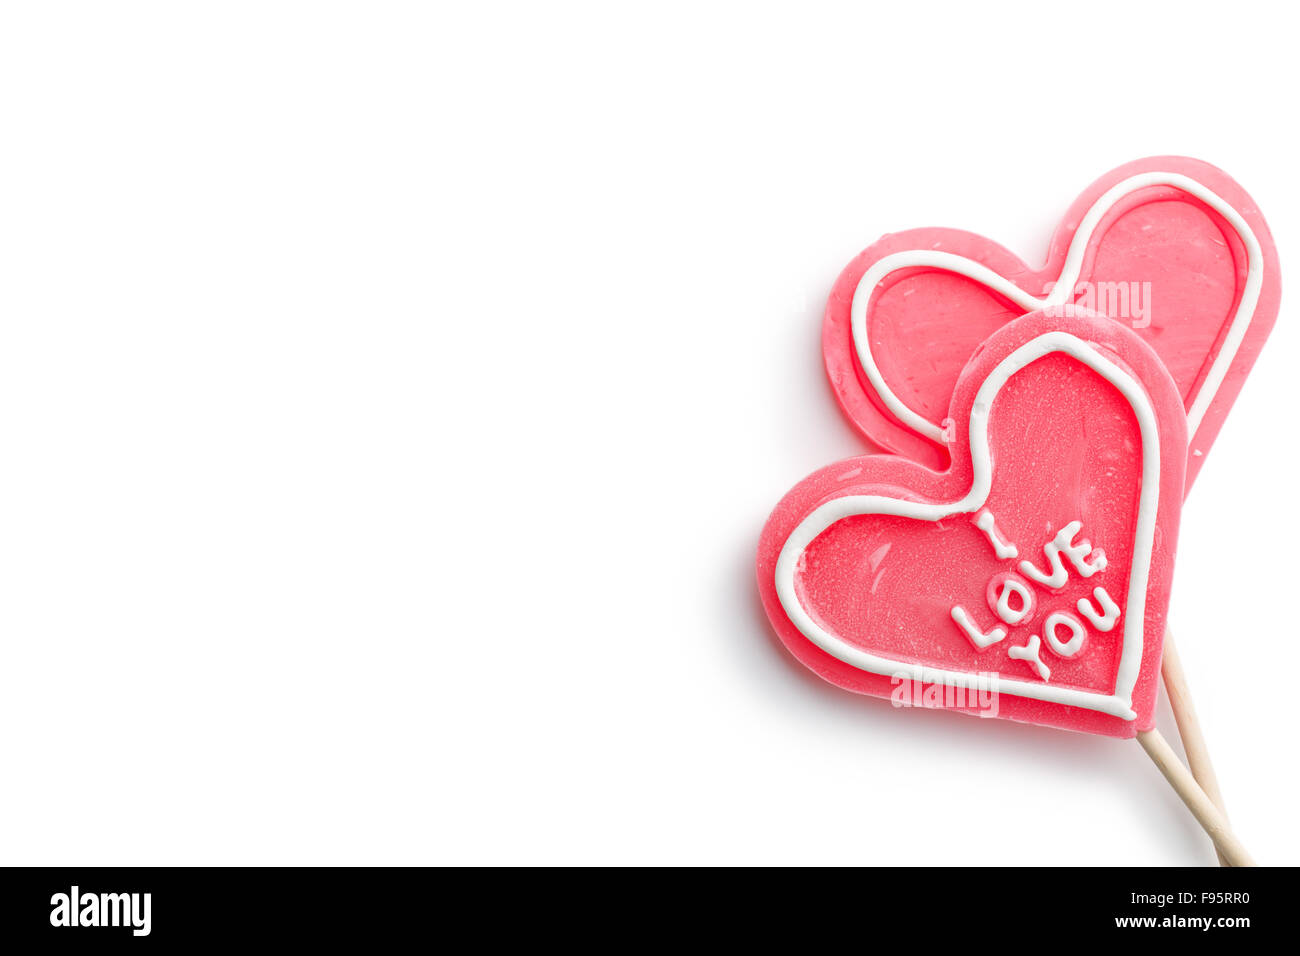 hearts shaped lollipop on white background Stock Photo